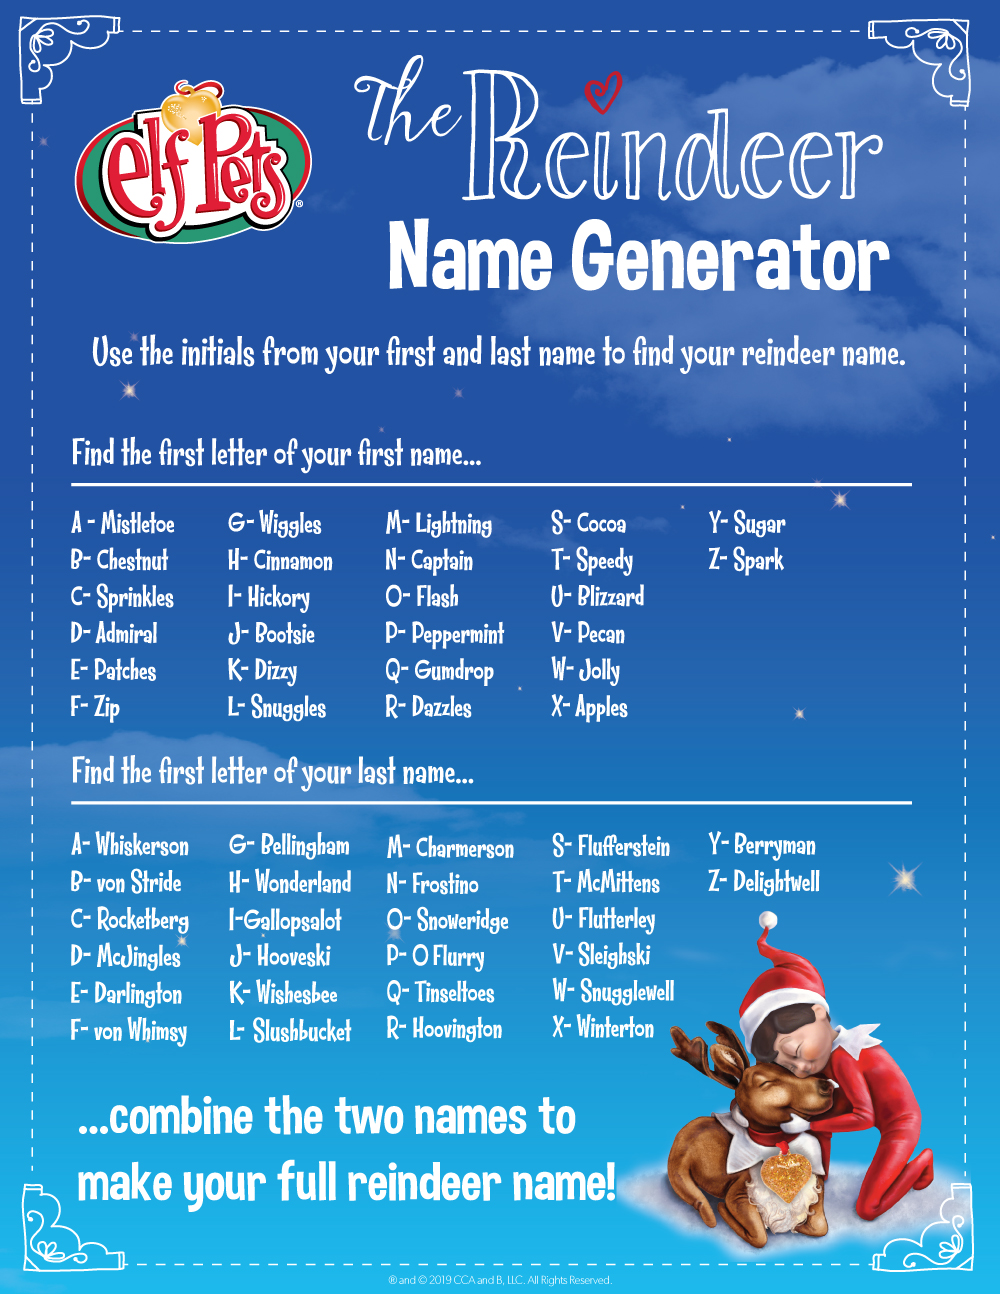 Find Your Reindeer Name! | The Elf on the Shelf